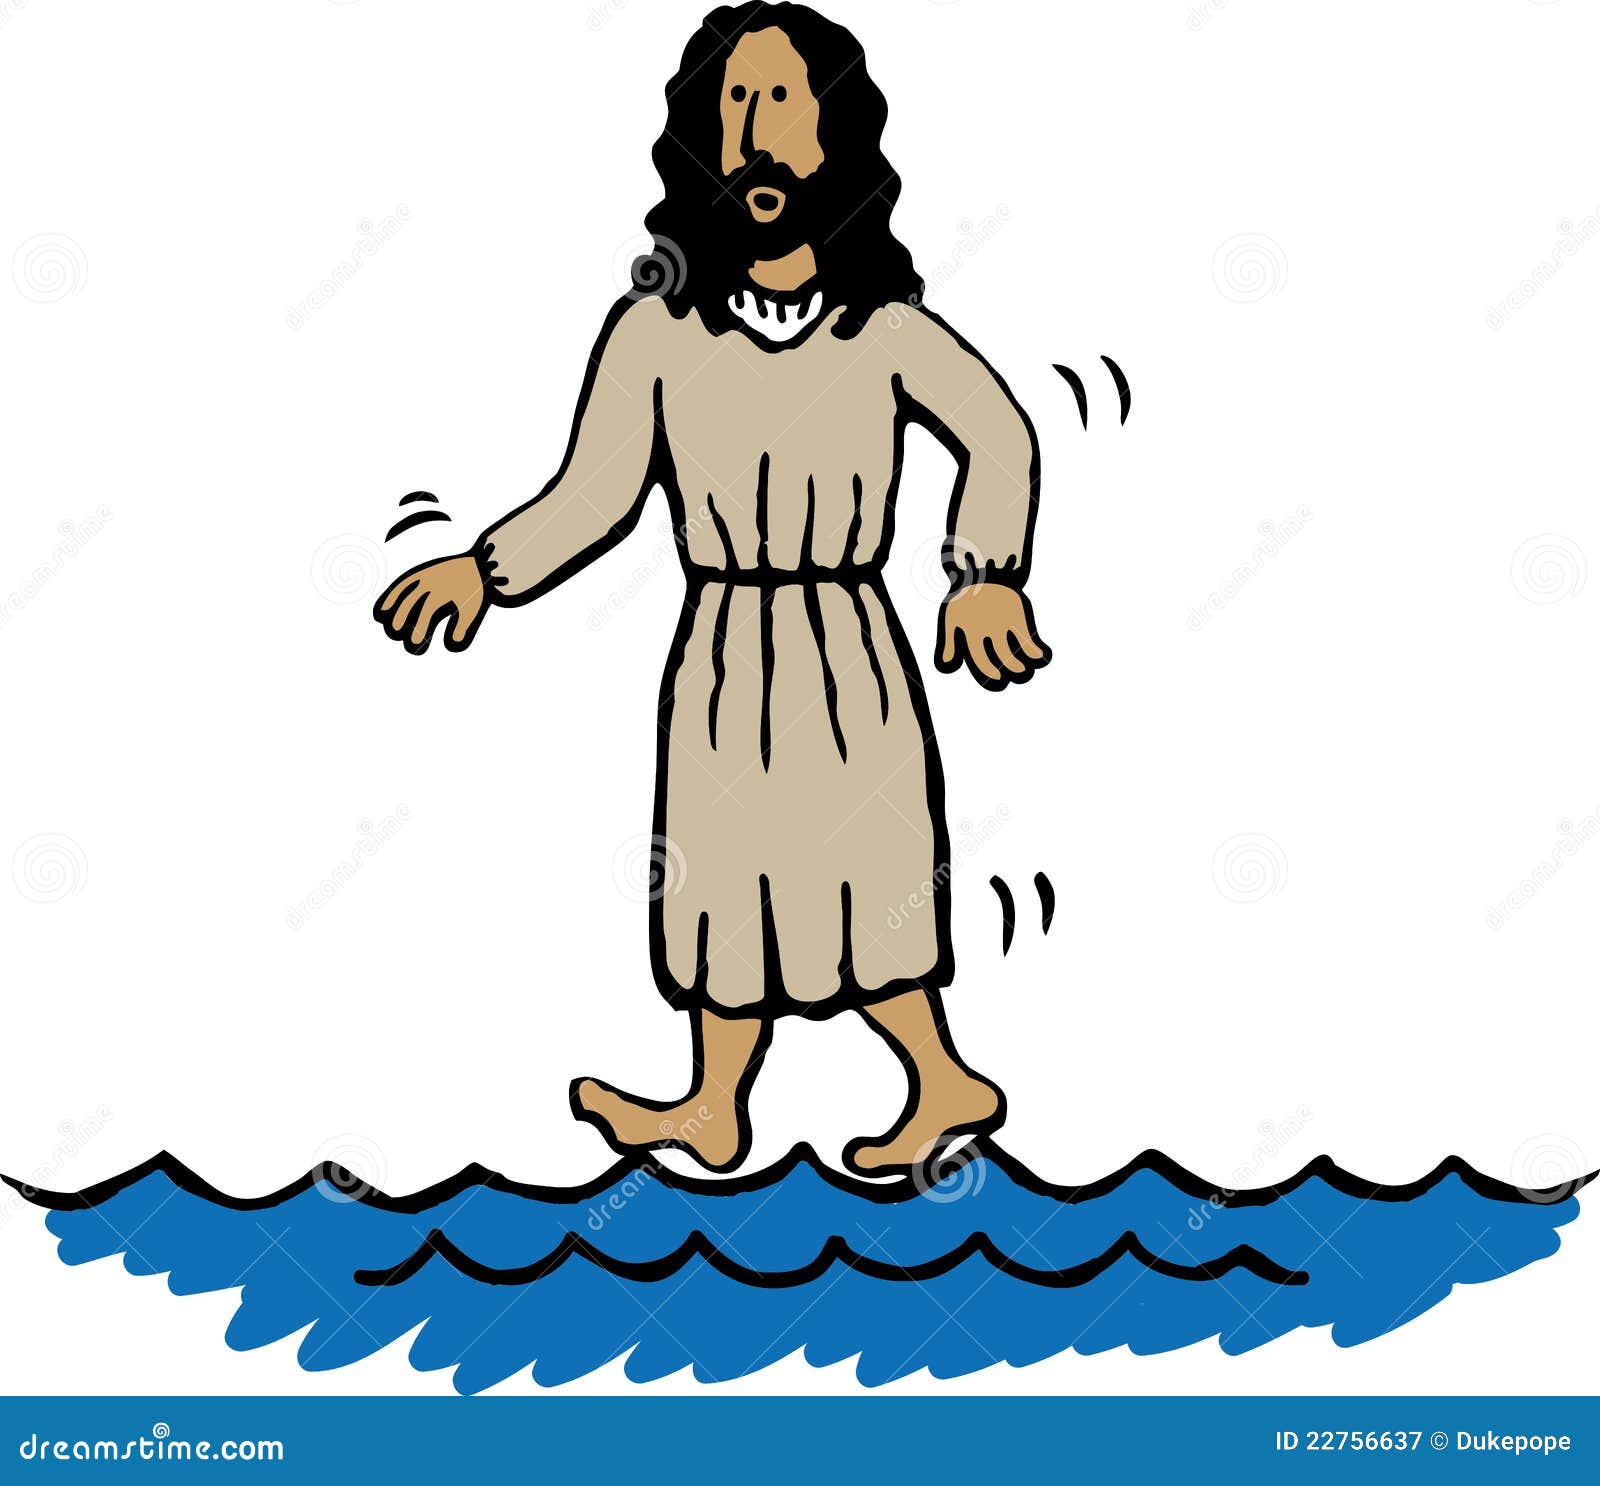 free clipart of jesus miracles - photo #36